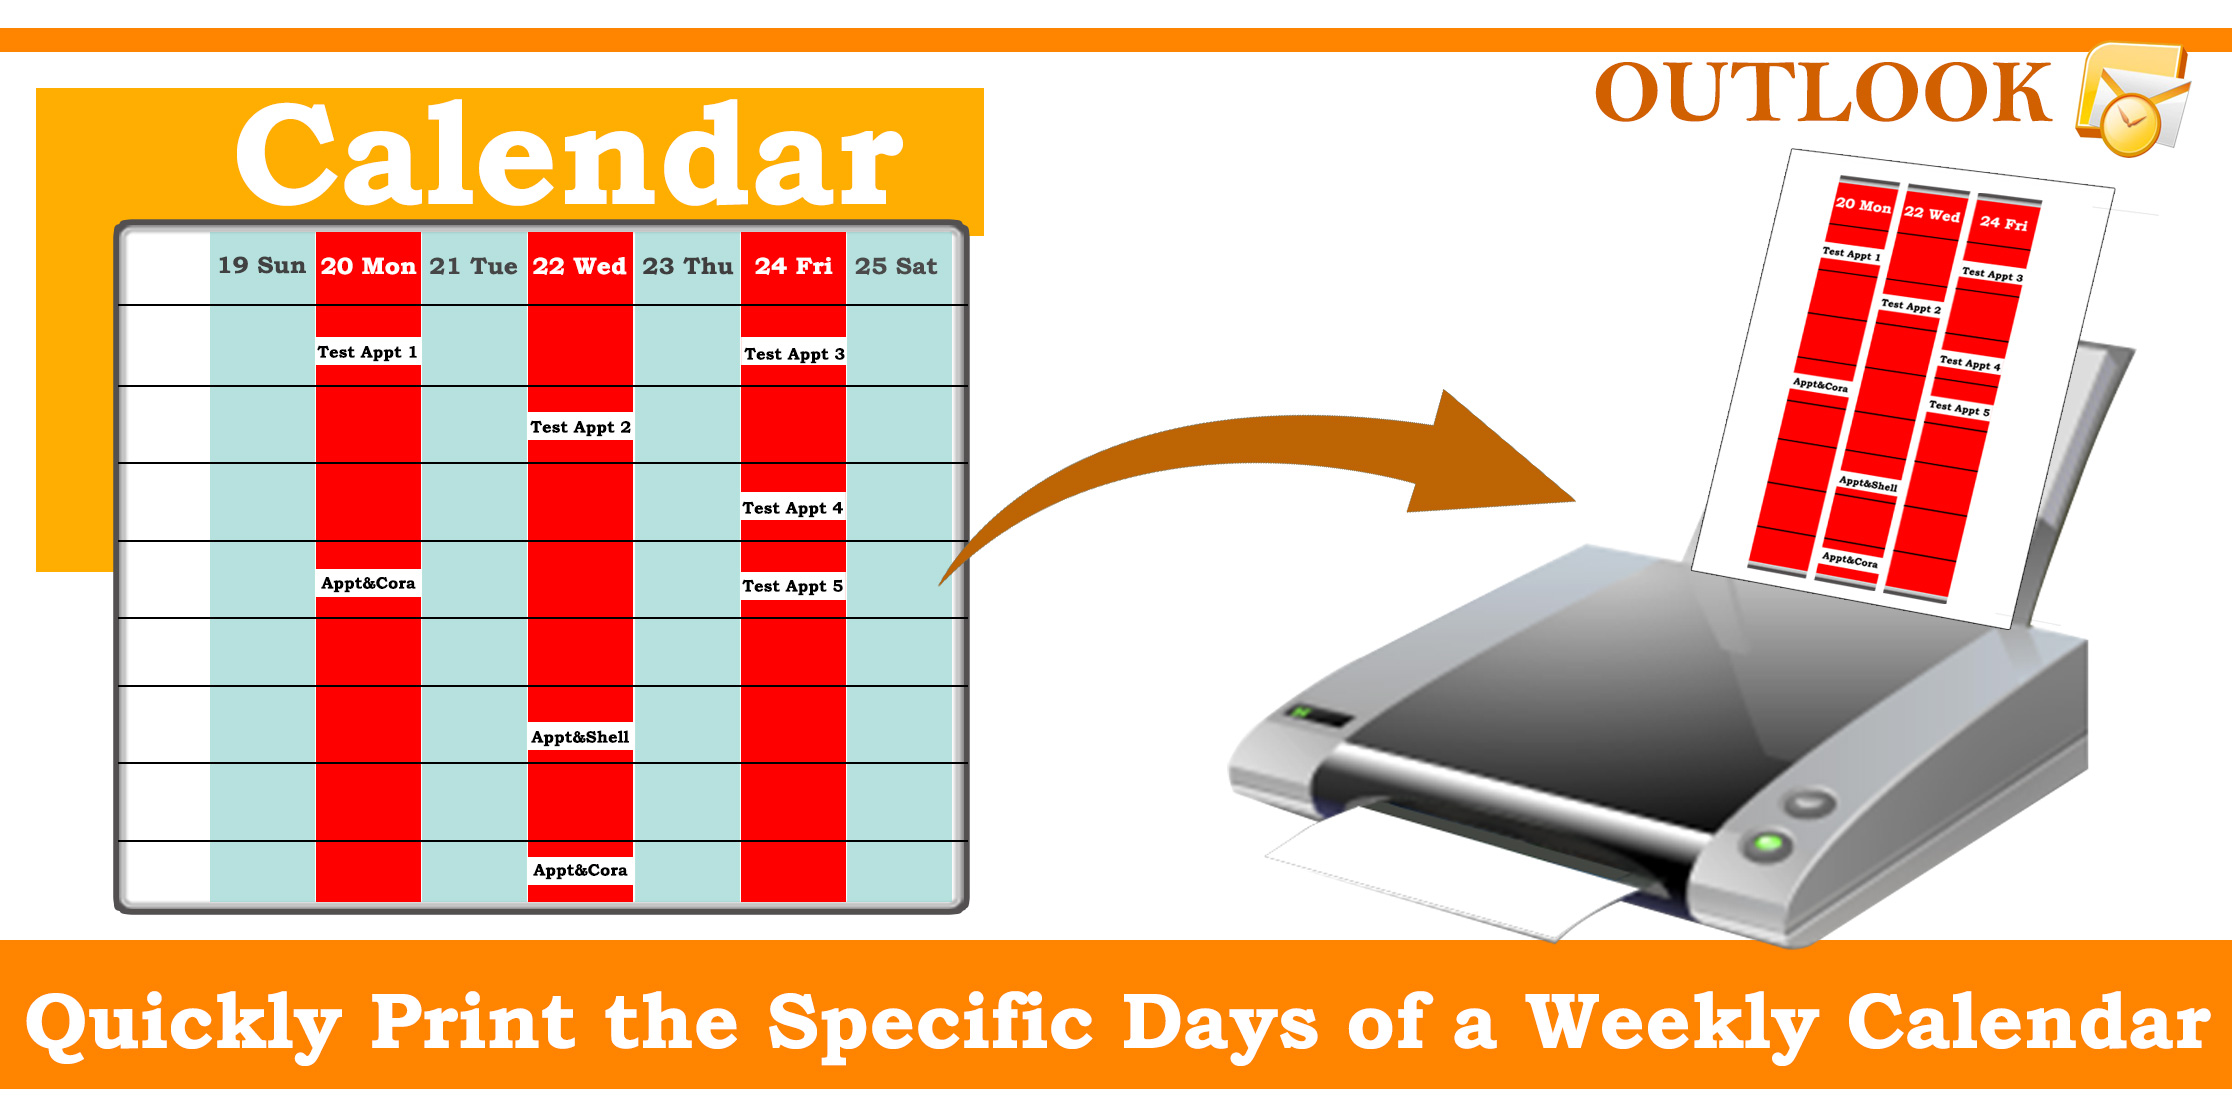 Quickly Print the Specific Days of a Weekly Calendar in Your Outlook